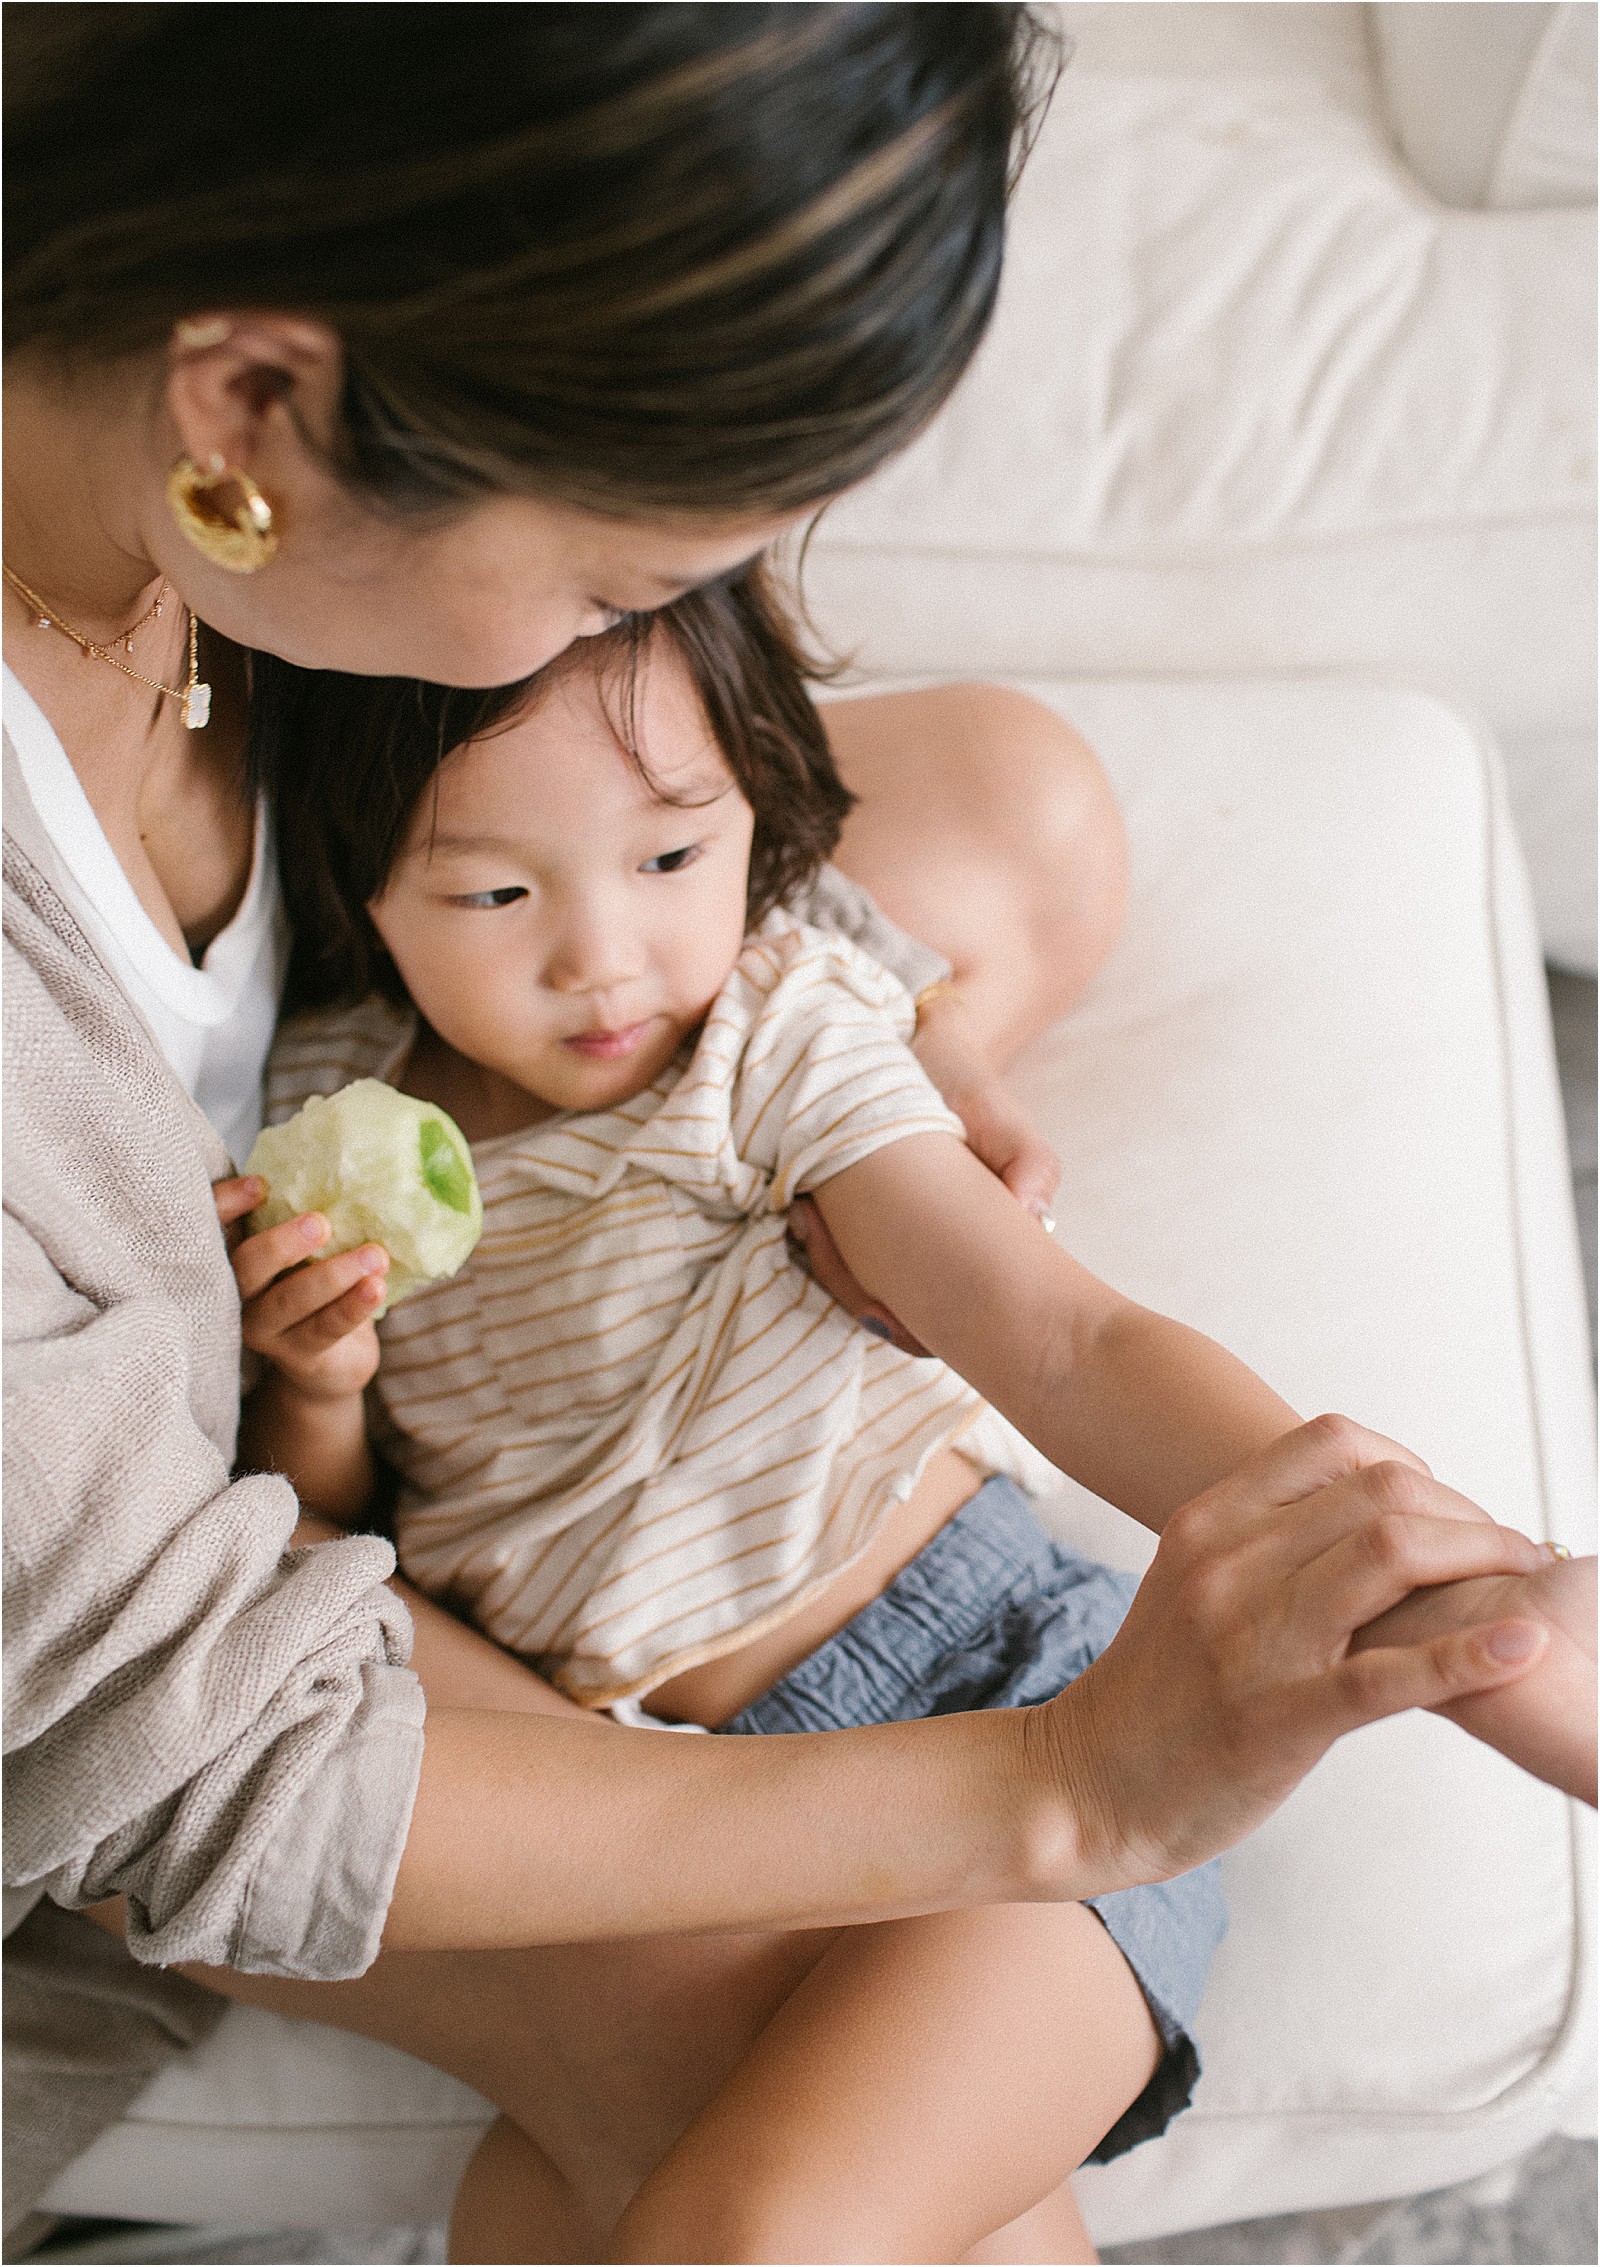 Atopic Dermatitis (Eczema) and What Families Should Know